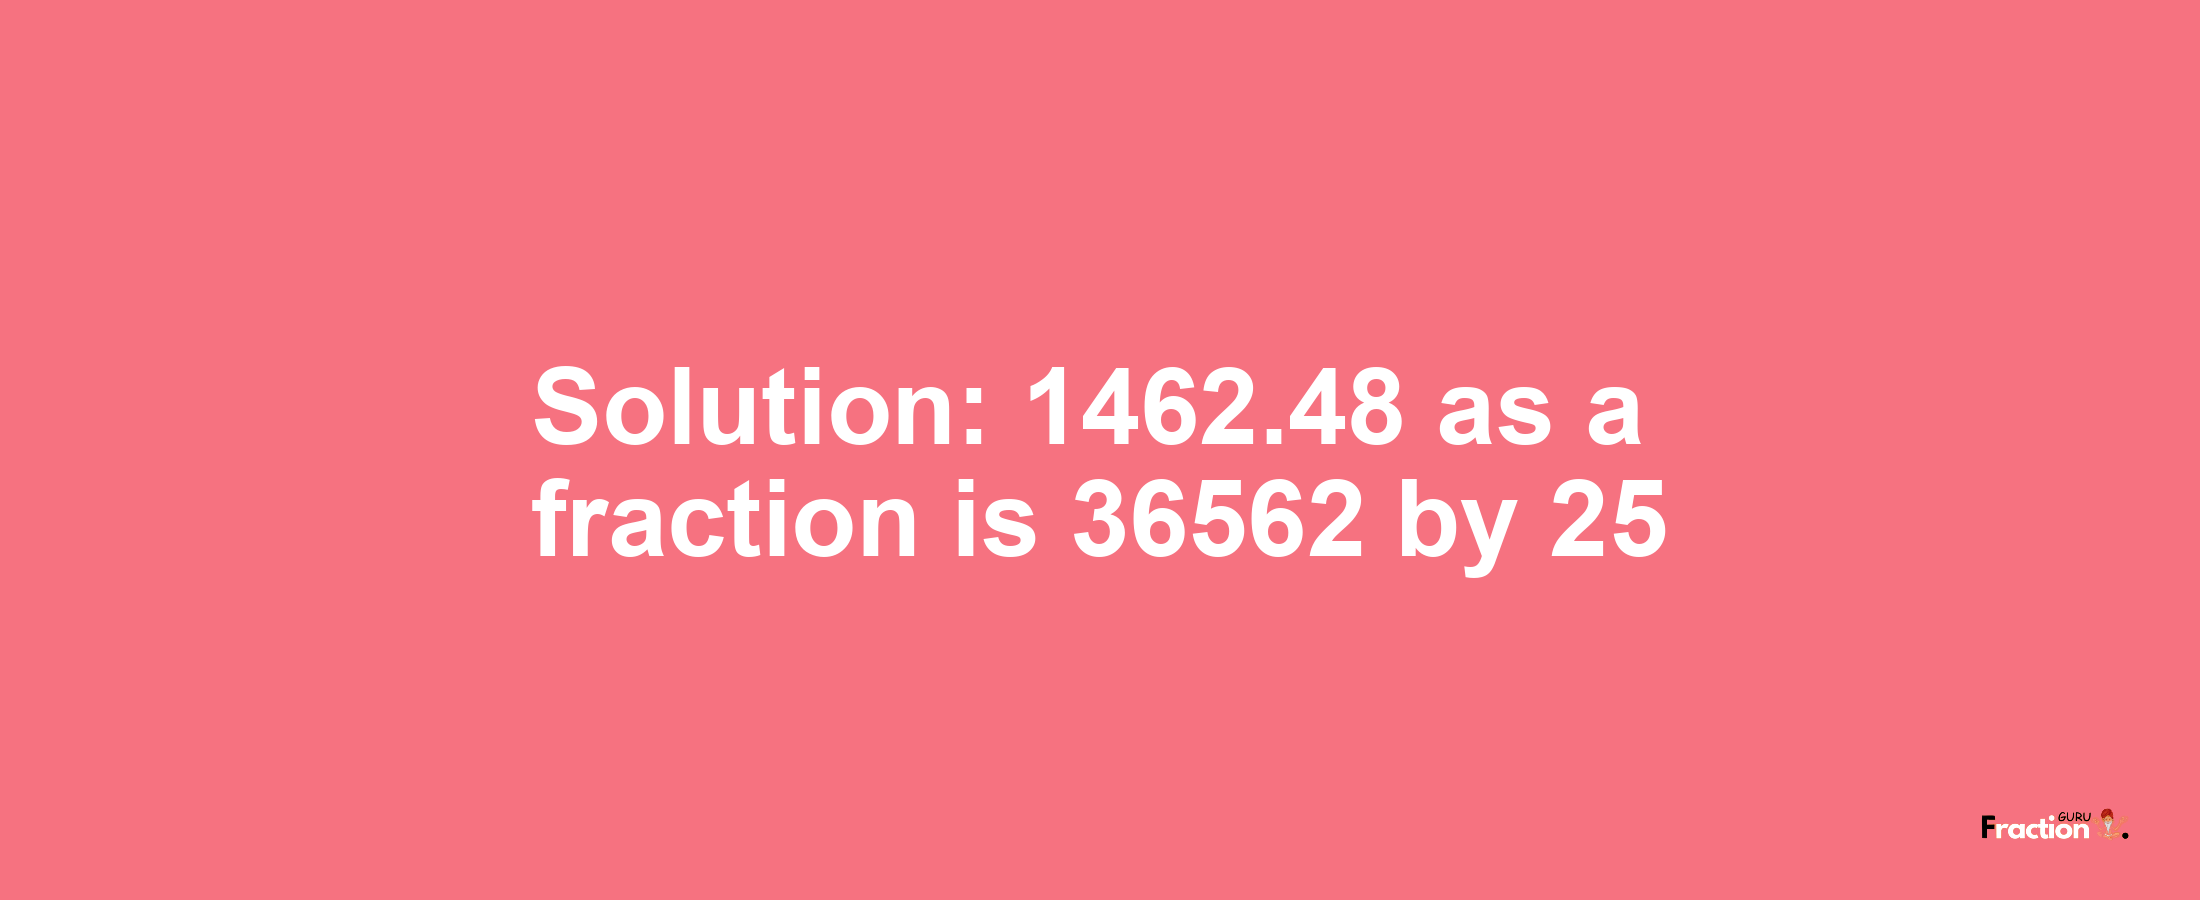 Solution:1462.48 as a fraction is 36562/25